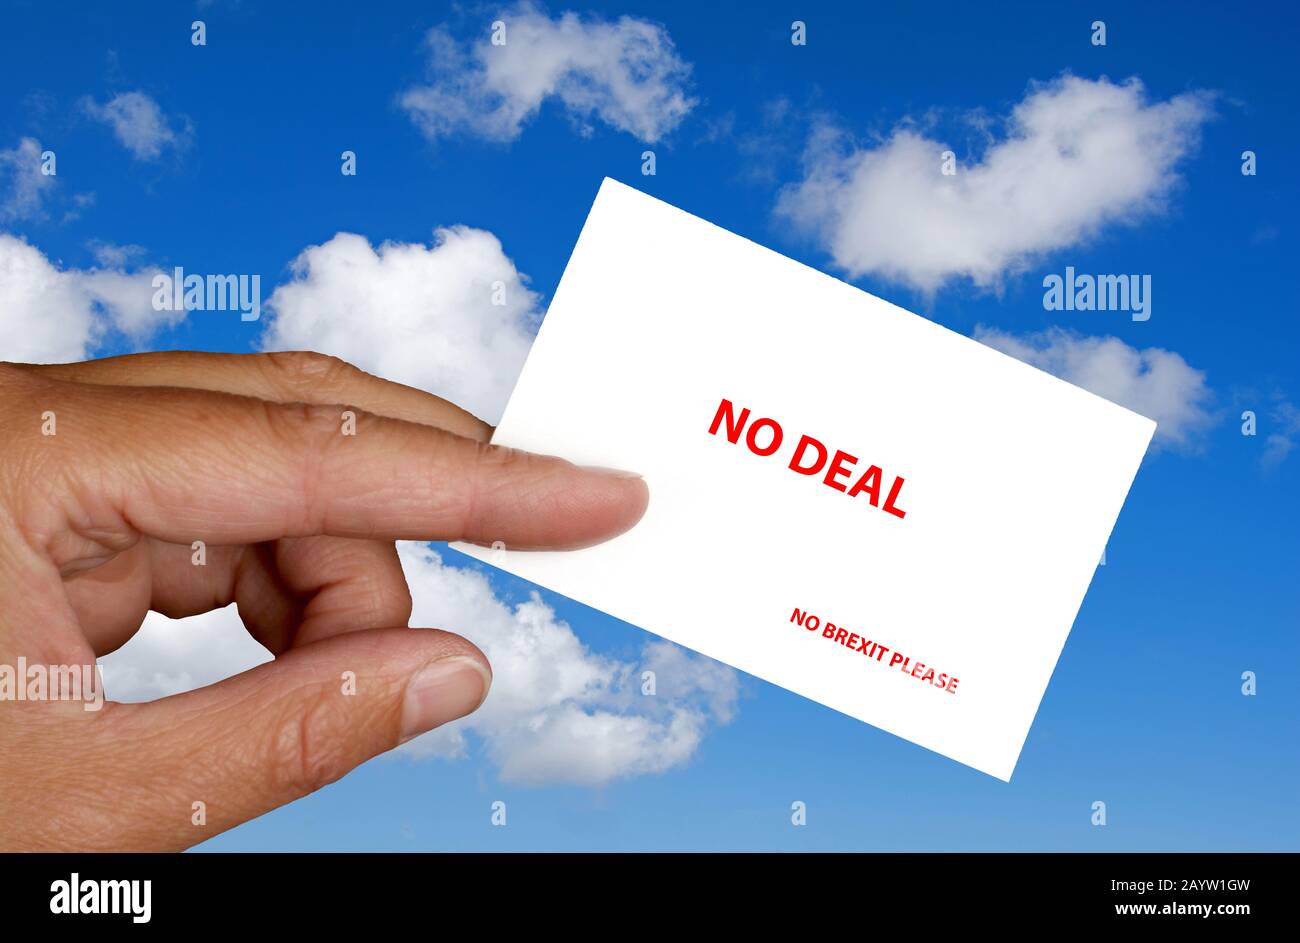 hand against blue sky holding card lettering No Deal, No brexit please, Germany Stock Photo